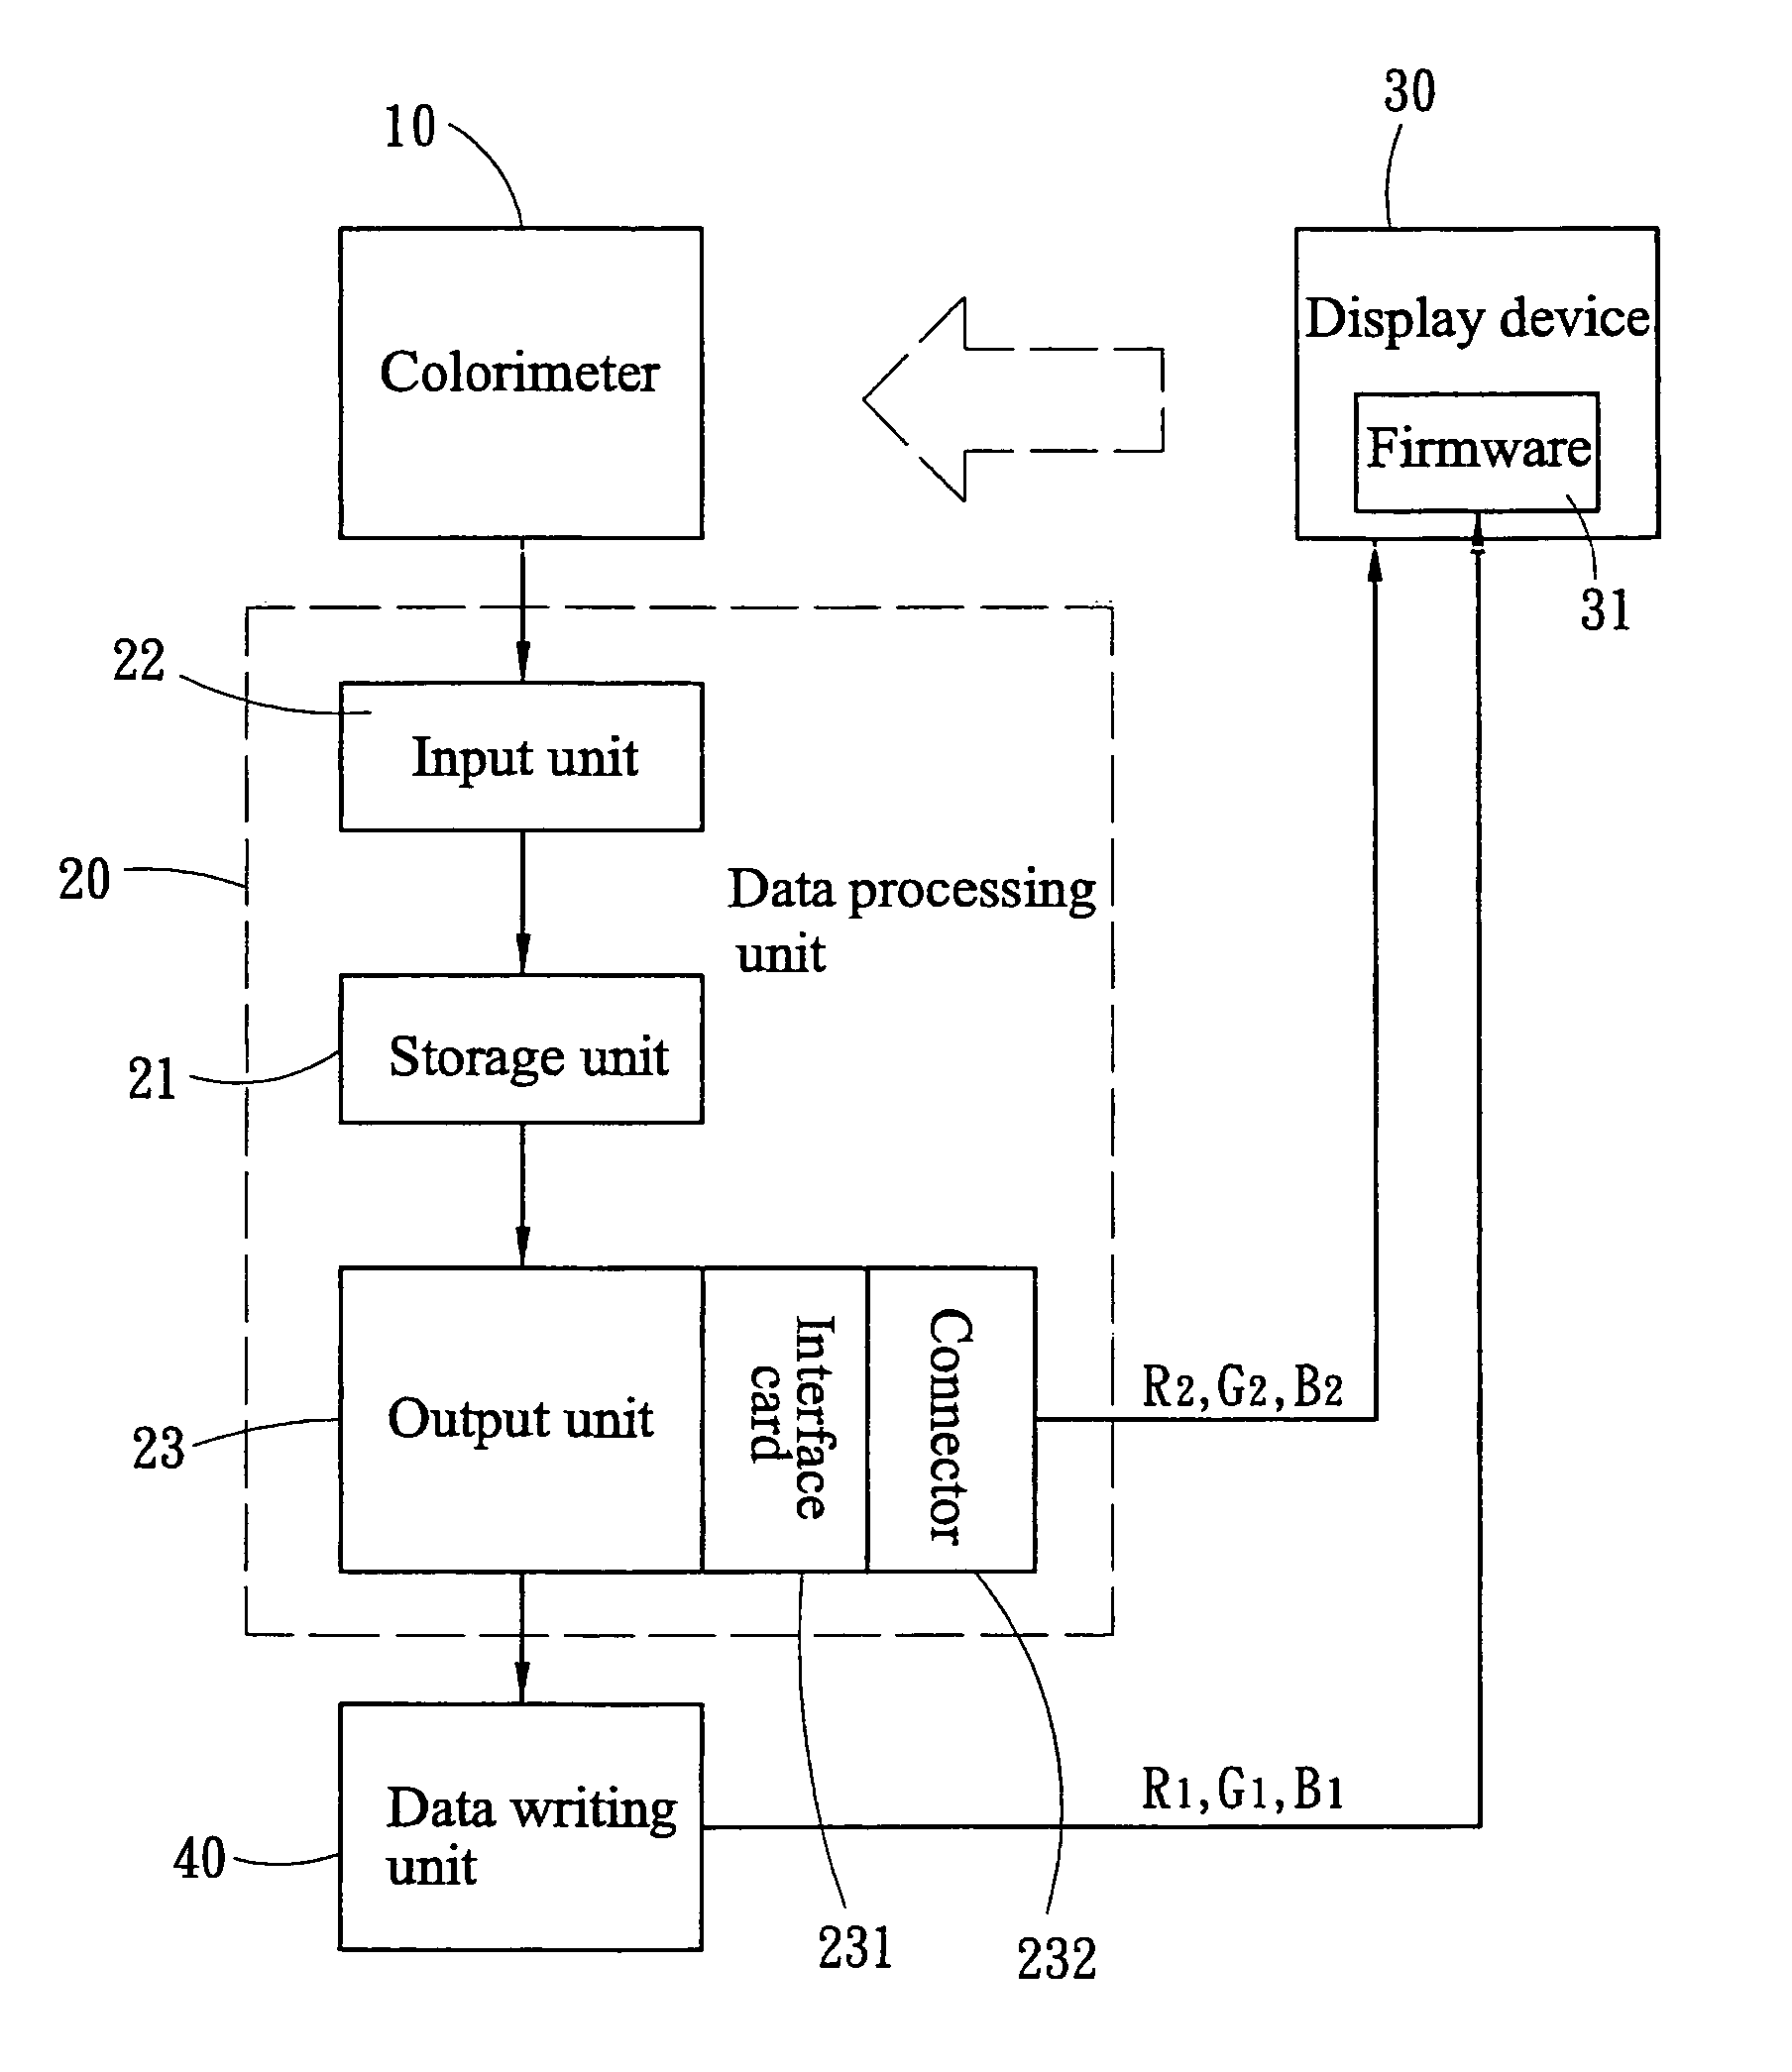 Method and apparatus for calibrating color temperature of color display devices